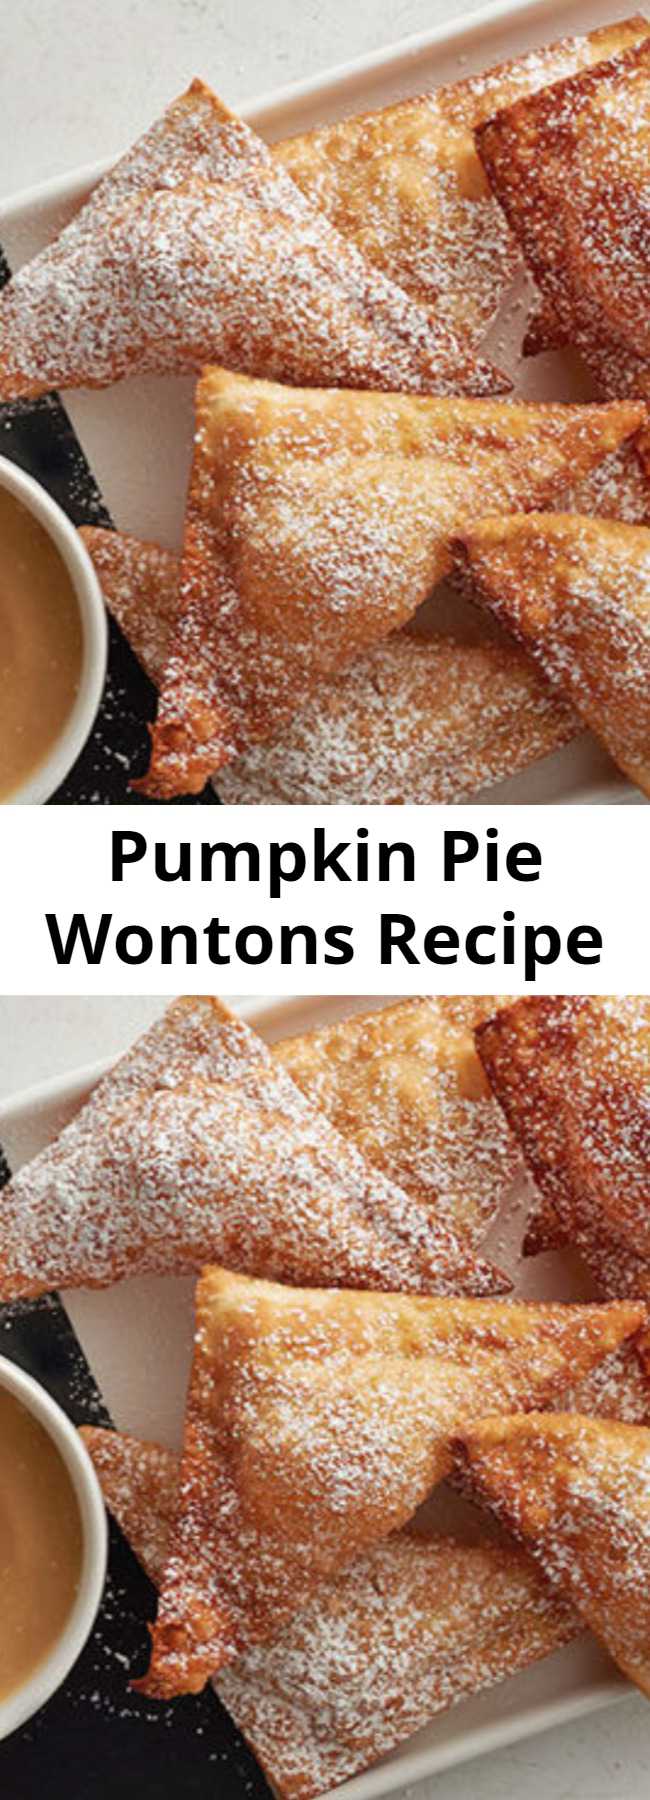 Pumpkin Pie Wontons Recipe - Magical pumpkin pie-flavored deep-fried goodness with a creamy maple dip on the side.